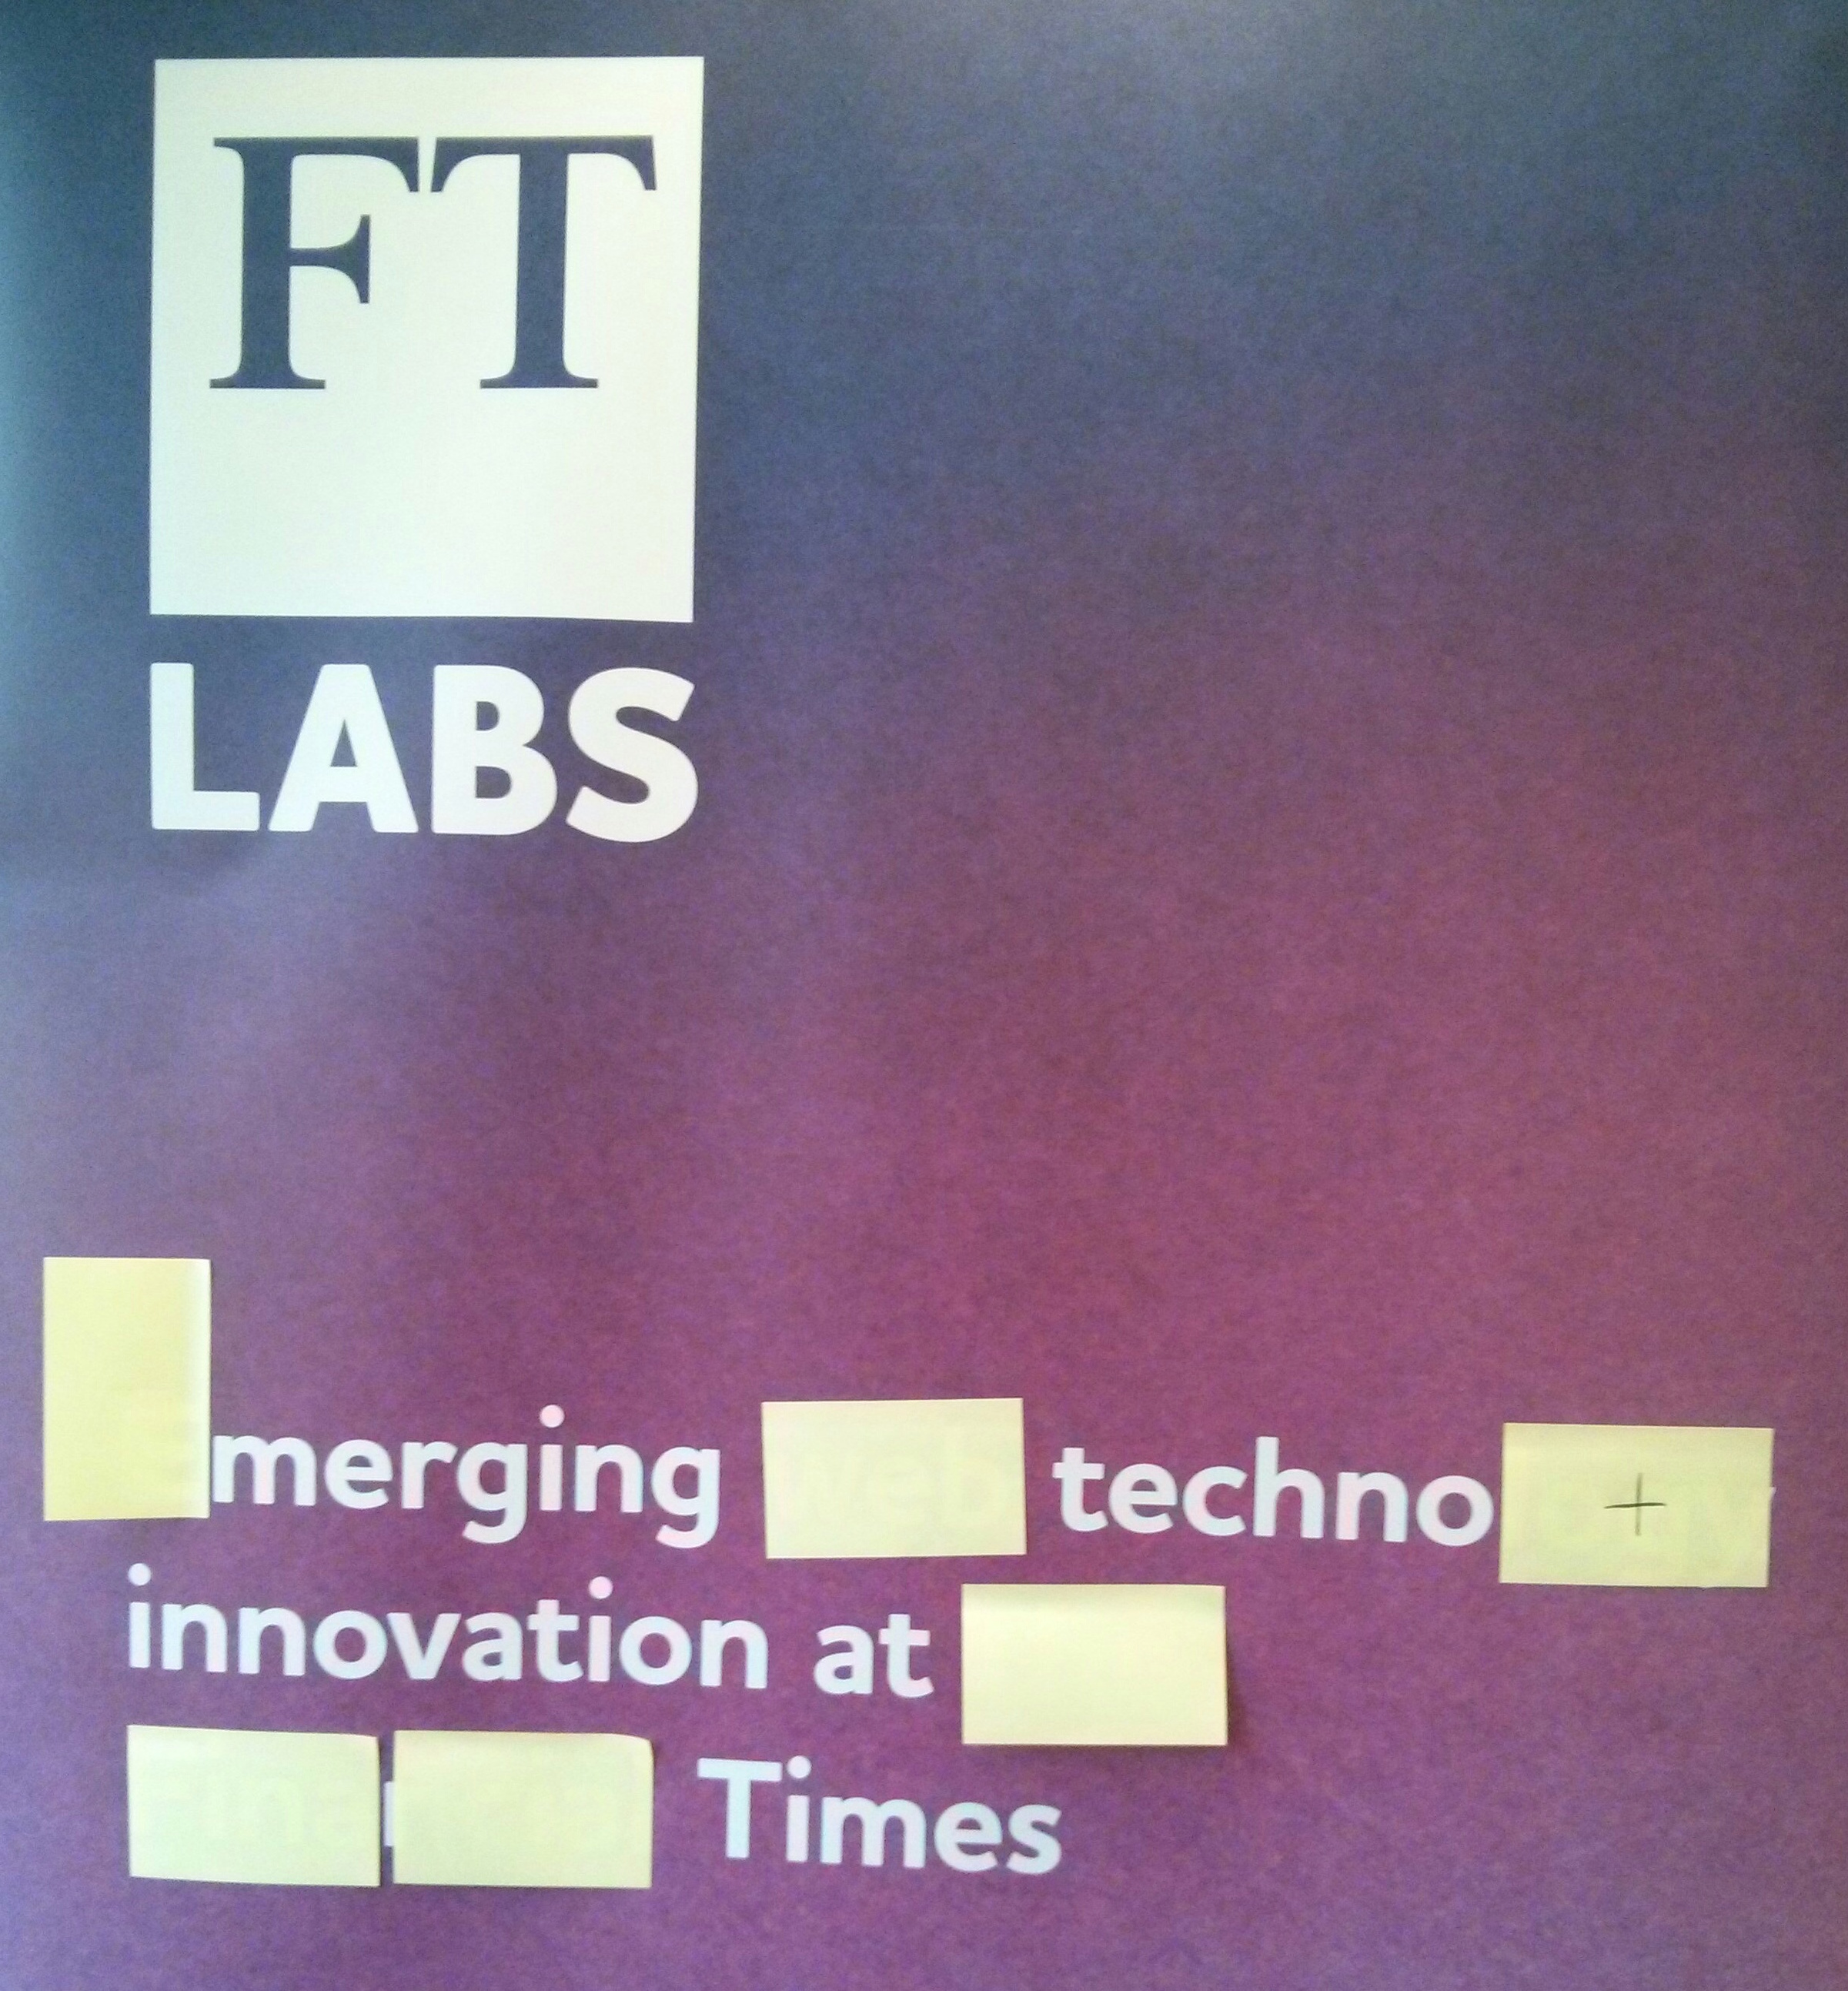 Trade show poster: FT Labs, Emerging web technology innovation at the Financial Times.